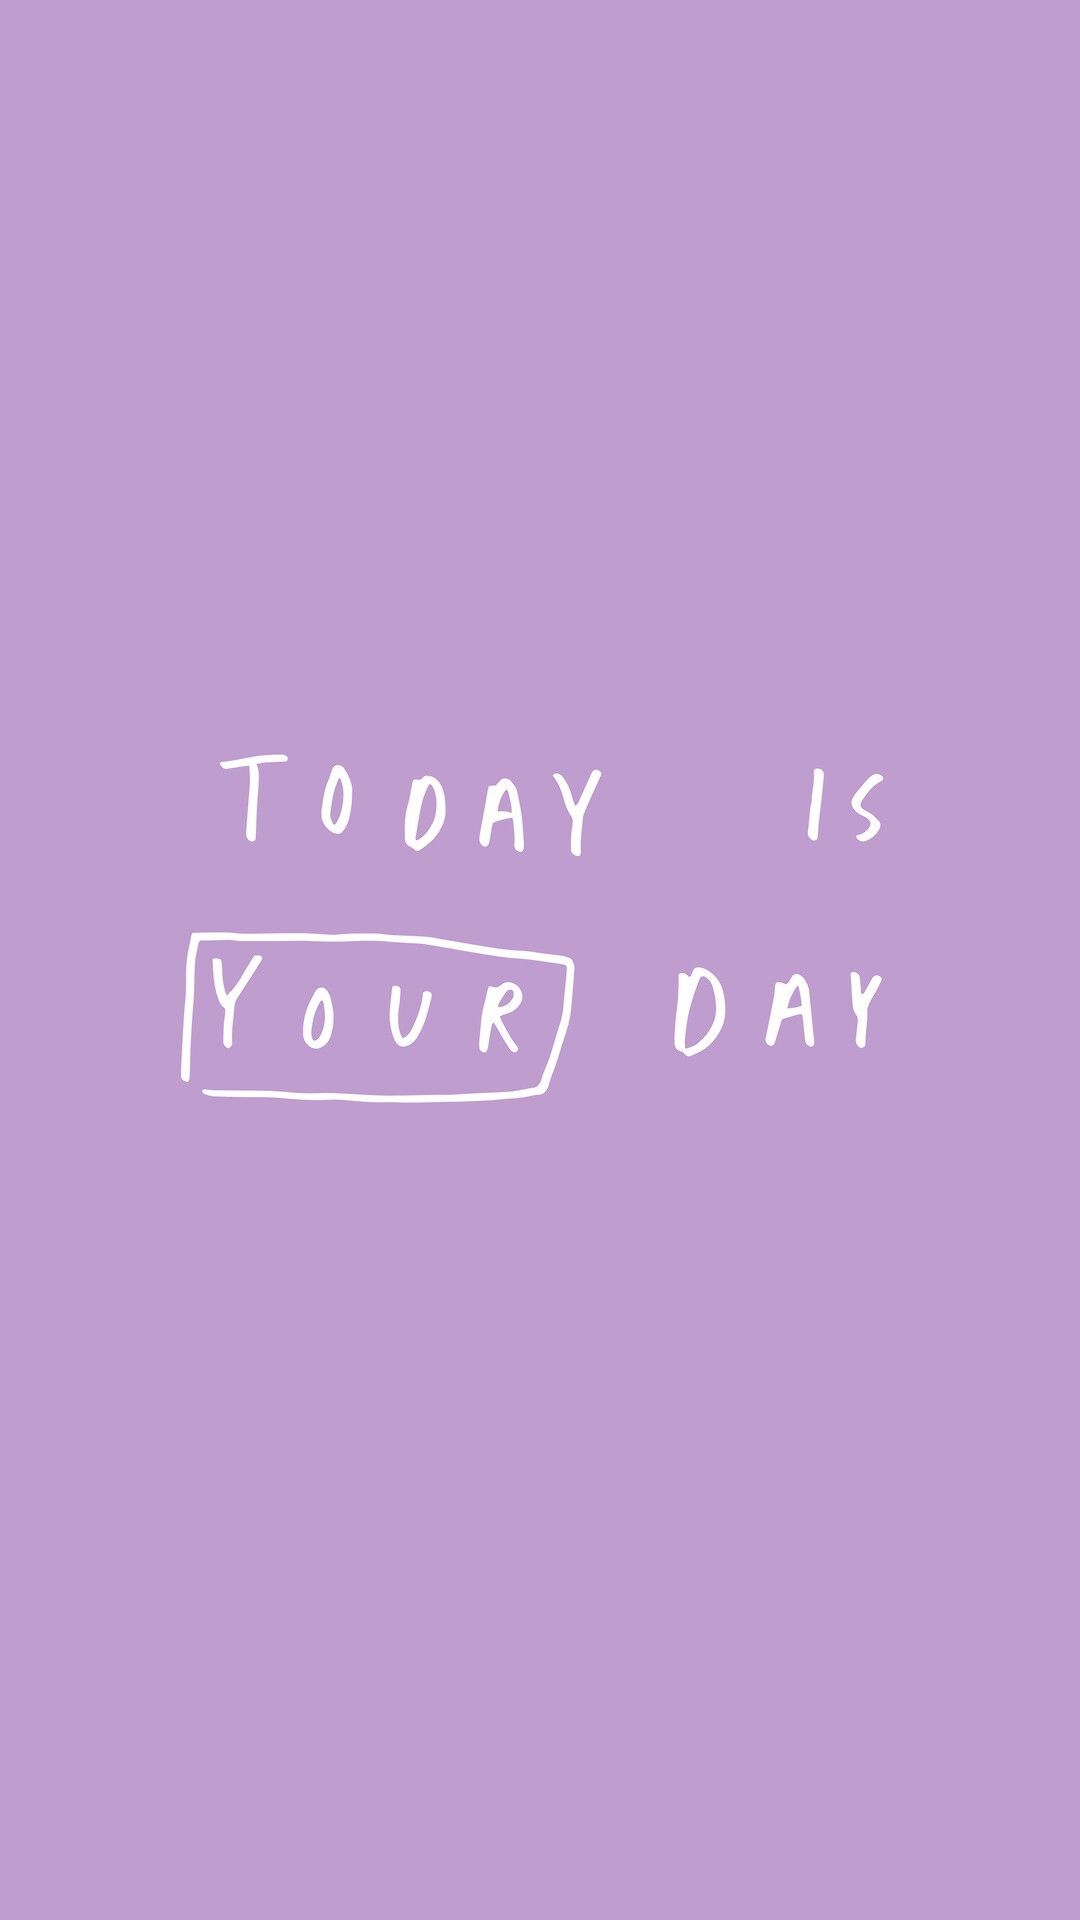 Today is your day - Purple quotes